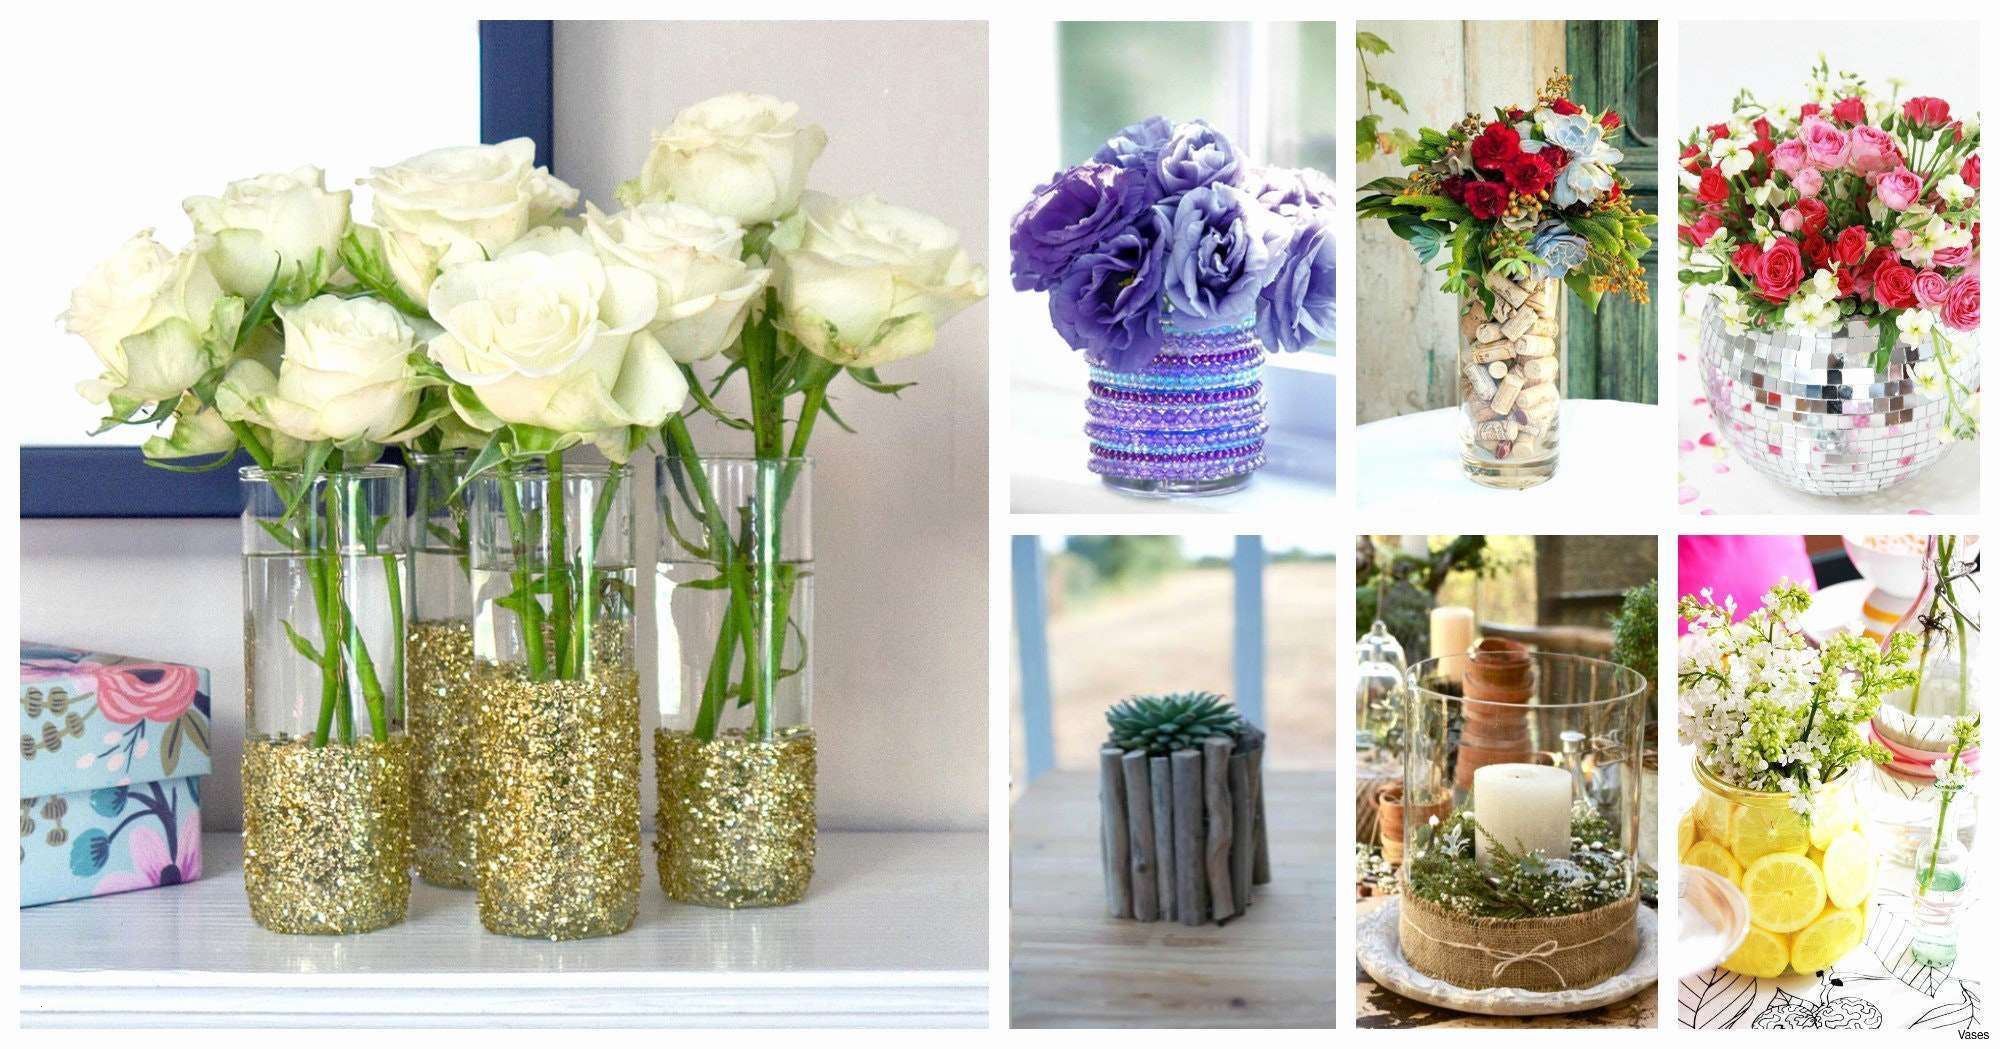 19 Lovable Rustic Wood Flower Vases 2024 free download rustic wood flower vases of 24 tall vases for sale the weekly world in simple wedding table decorations unique dsc h vases square